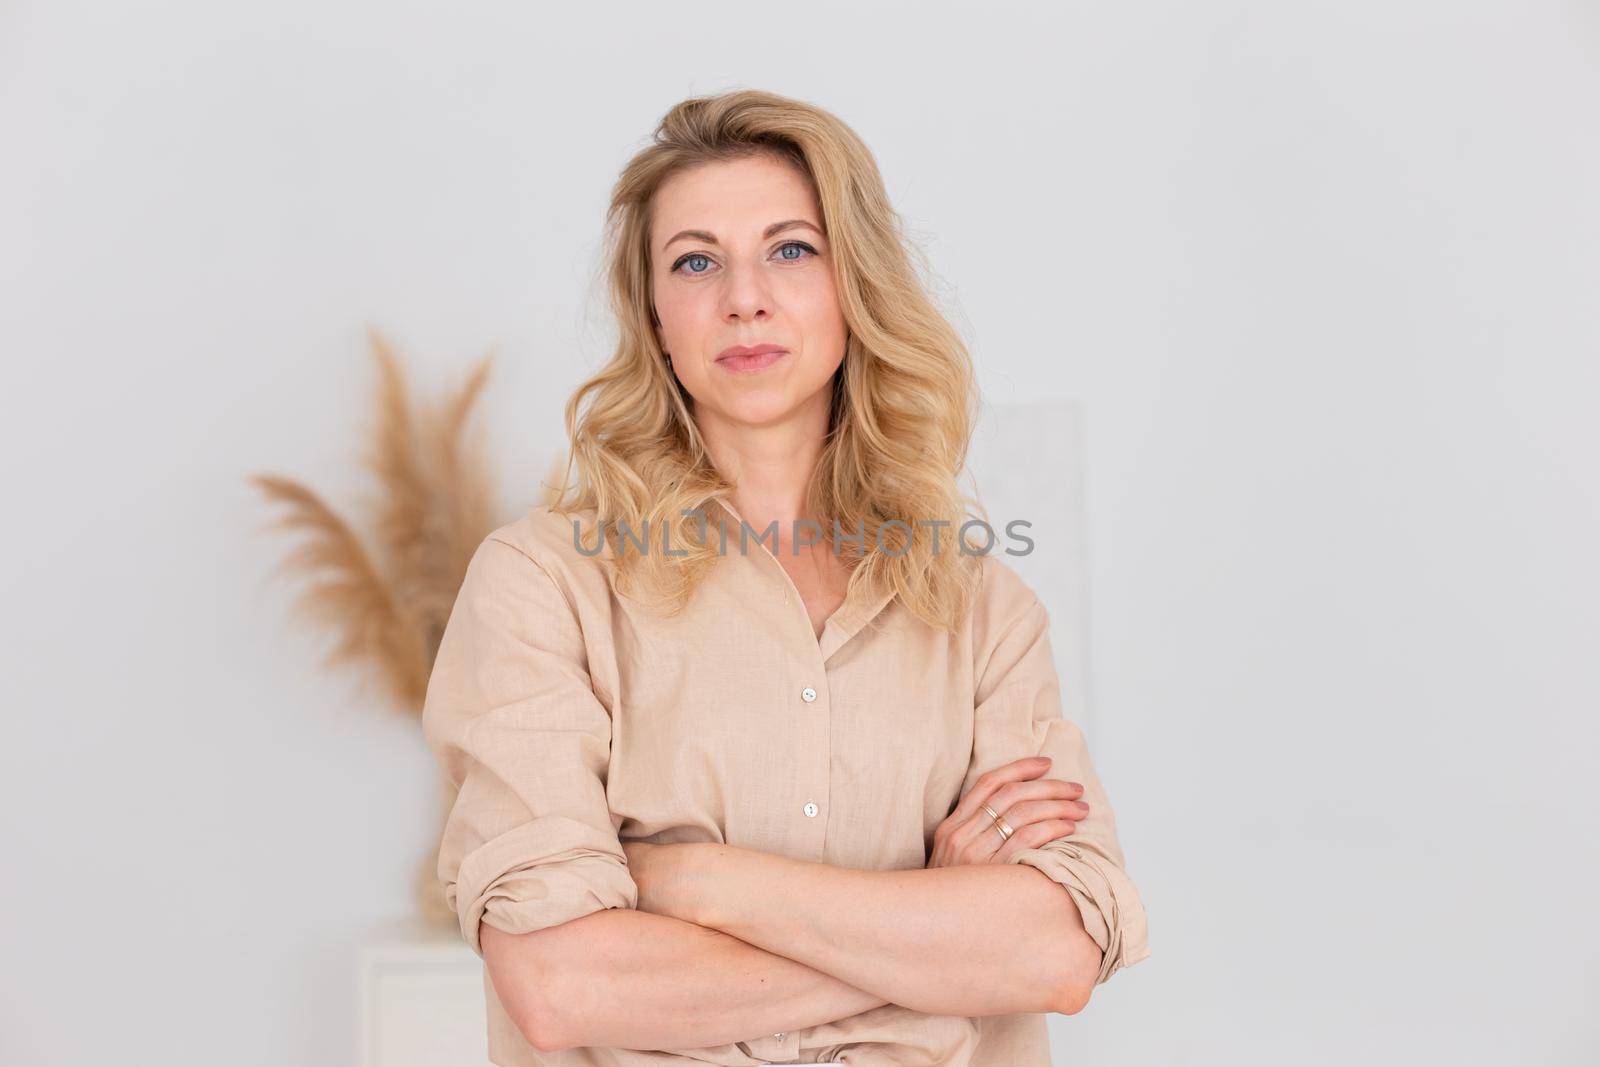 Portrait of a beautiful woman, 30-40 years old, with blond hair, stands in a beige linen shirt and white trousers, in a white room interior. Copy space